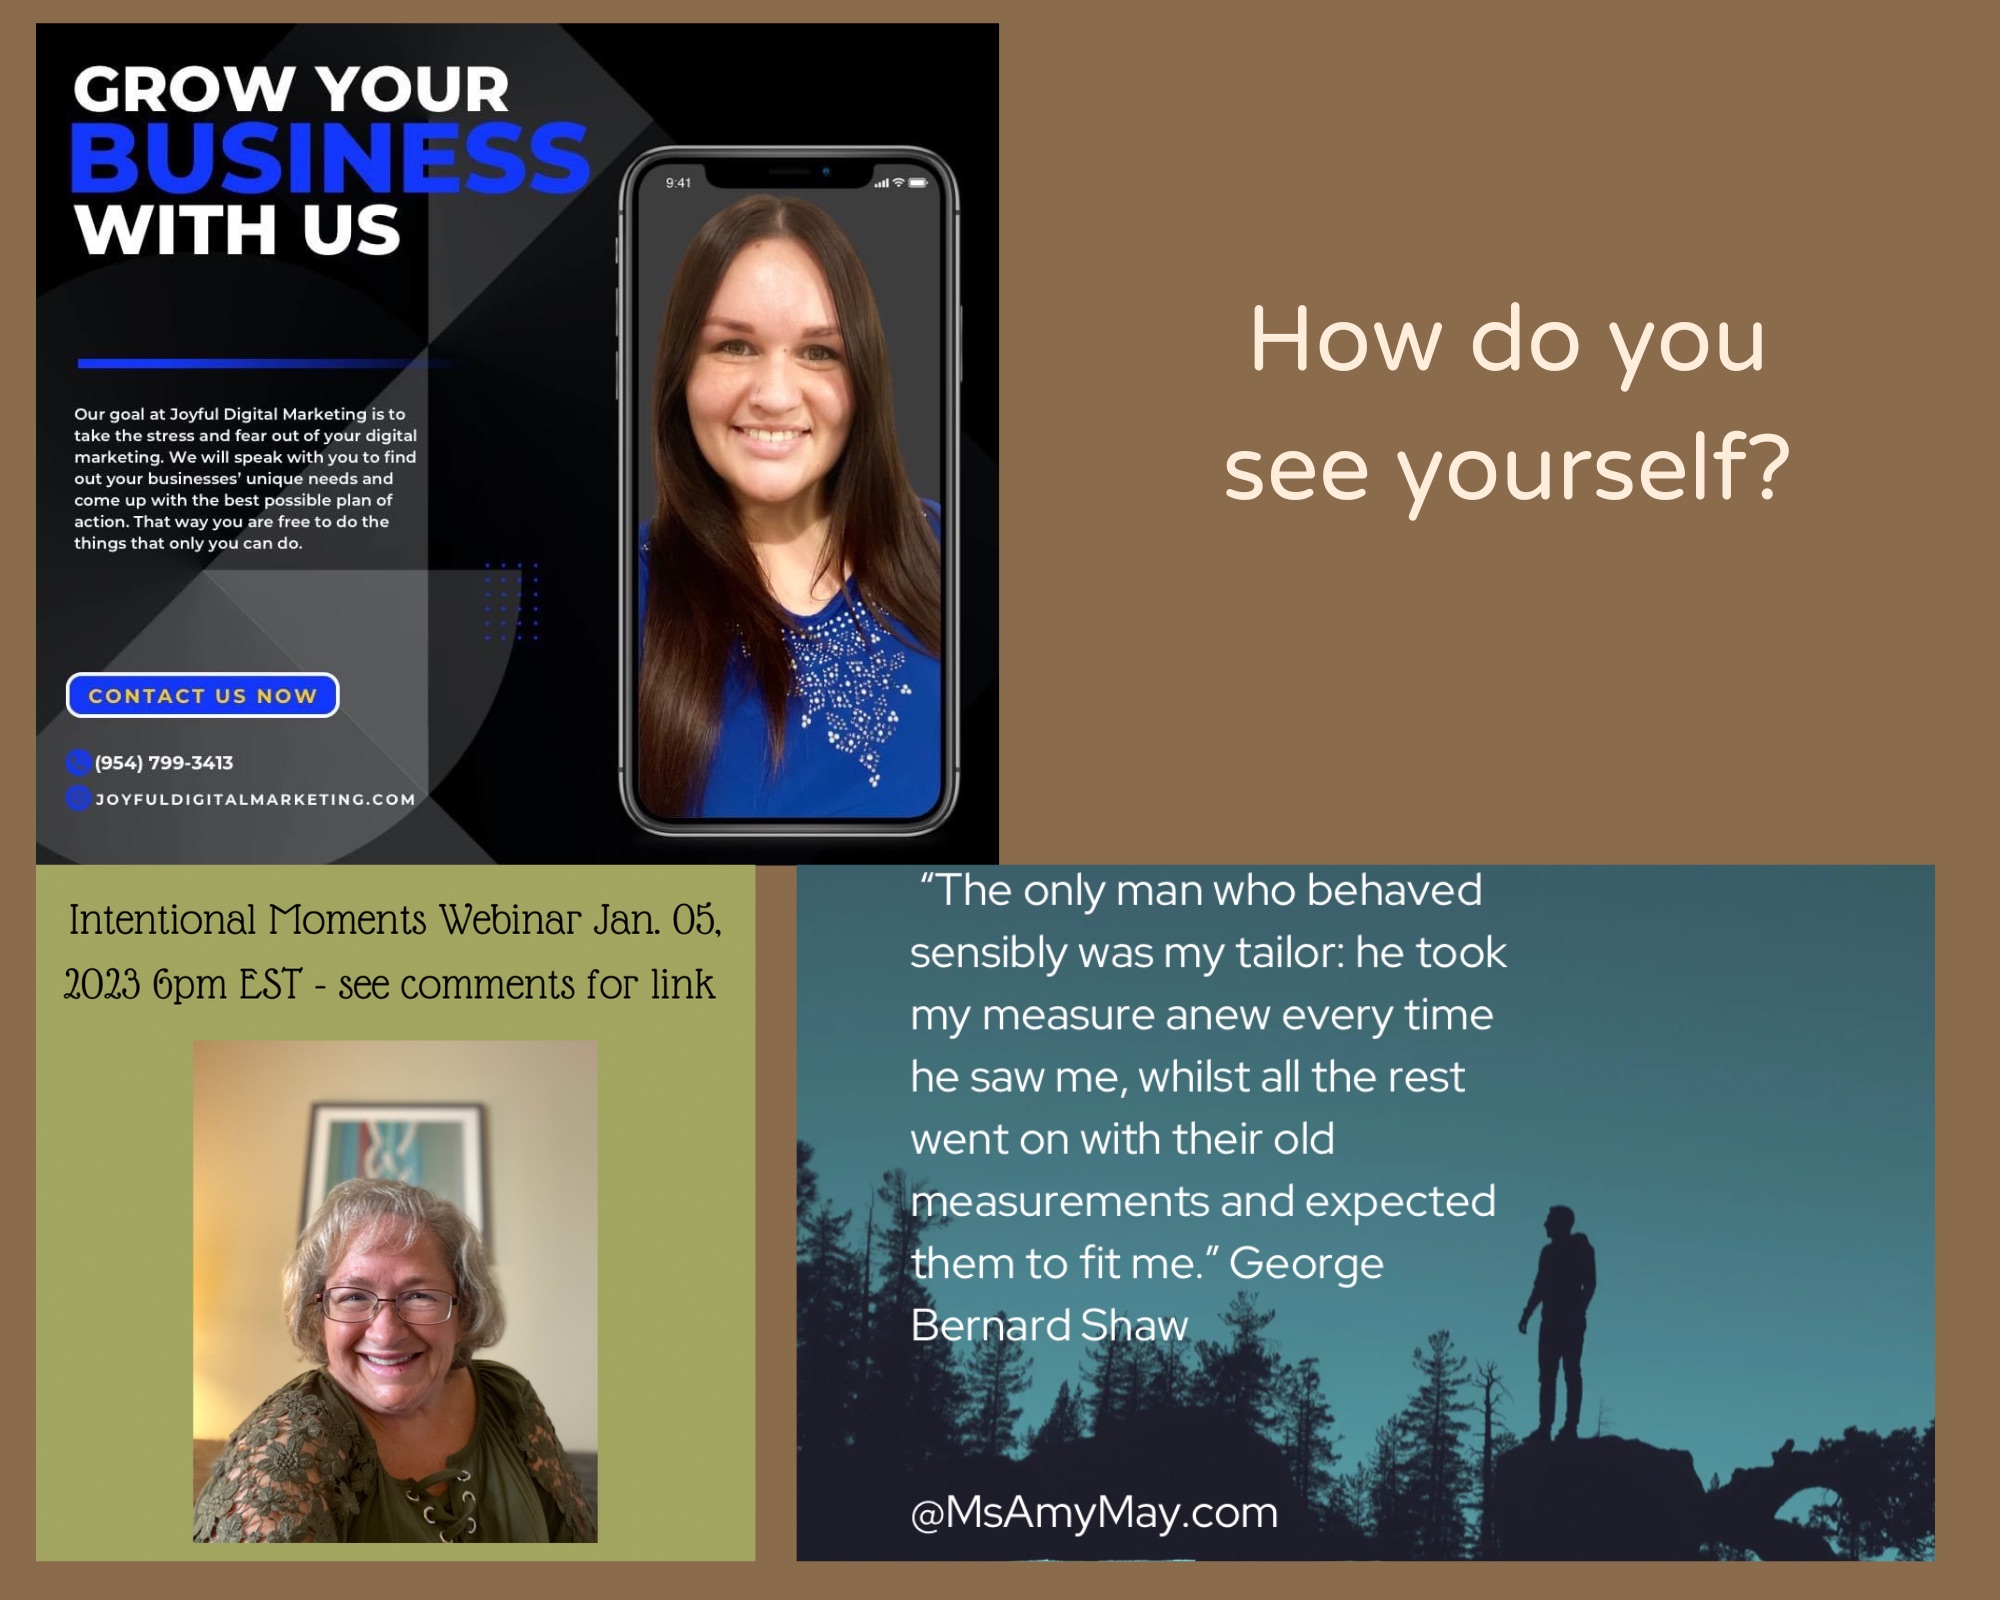 Photo collage of 2 photos and one quote. The quote is the one previously mentioned by George Bernard Shaw. One photo is of Jorjia talking about her business and one is of Amy mentioning the webinar. 